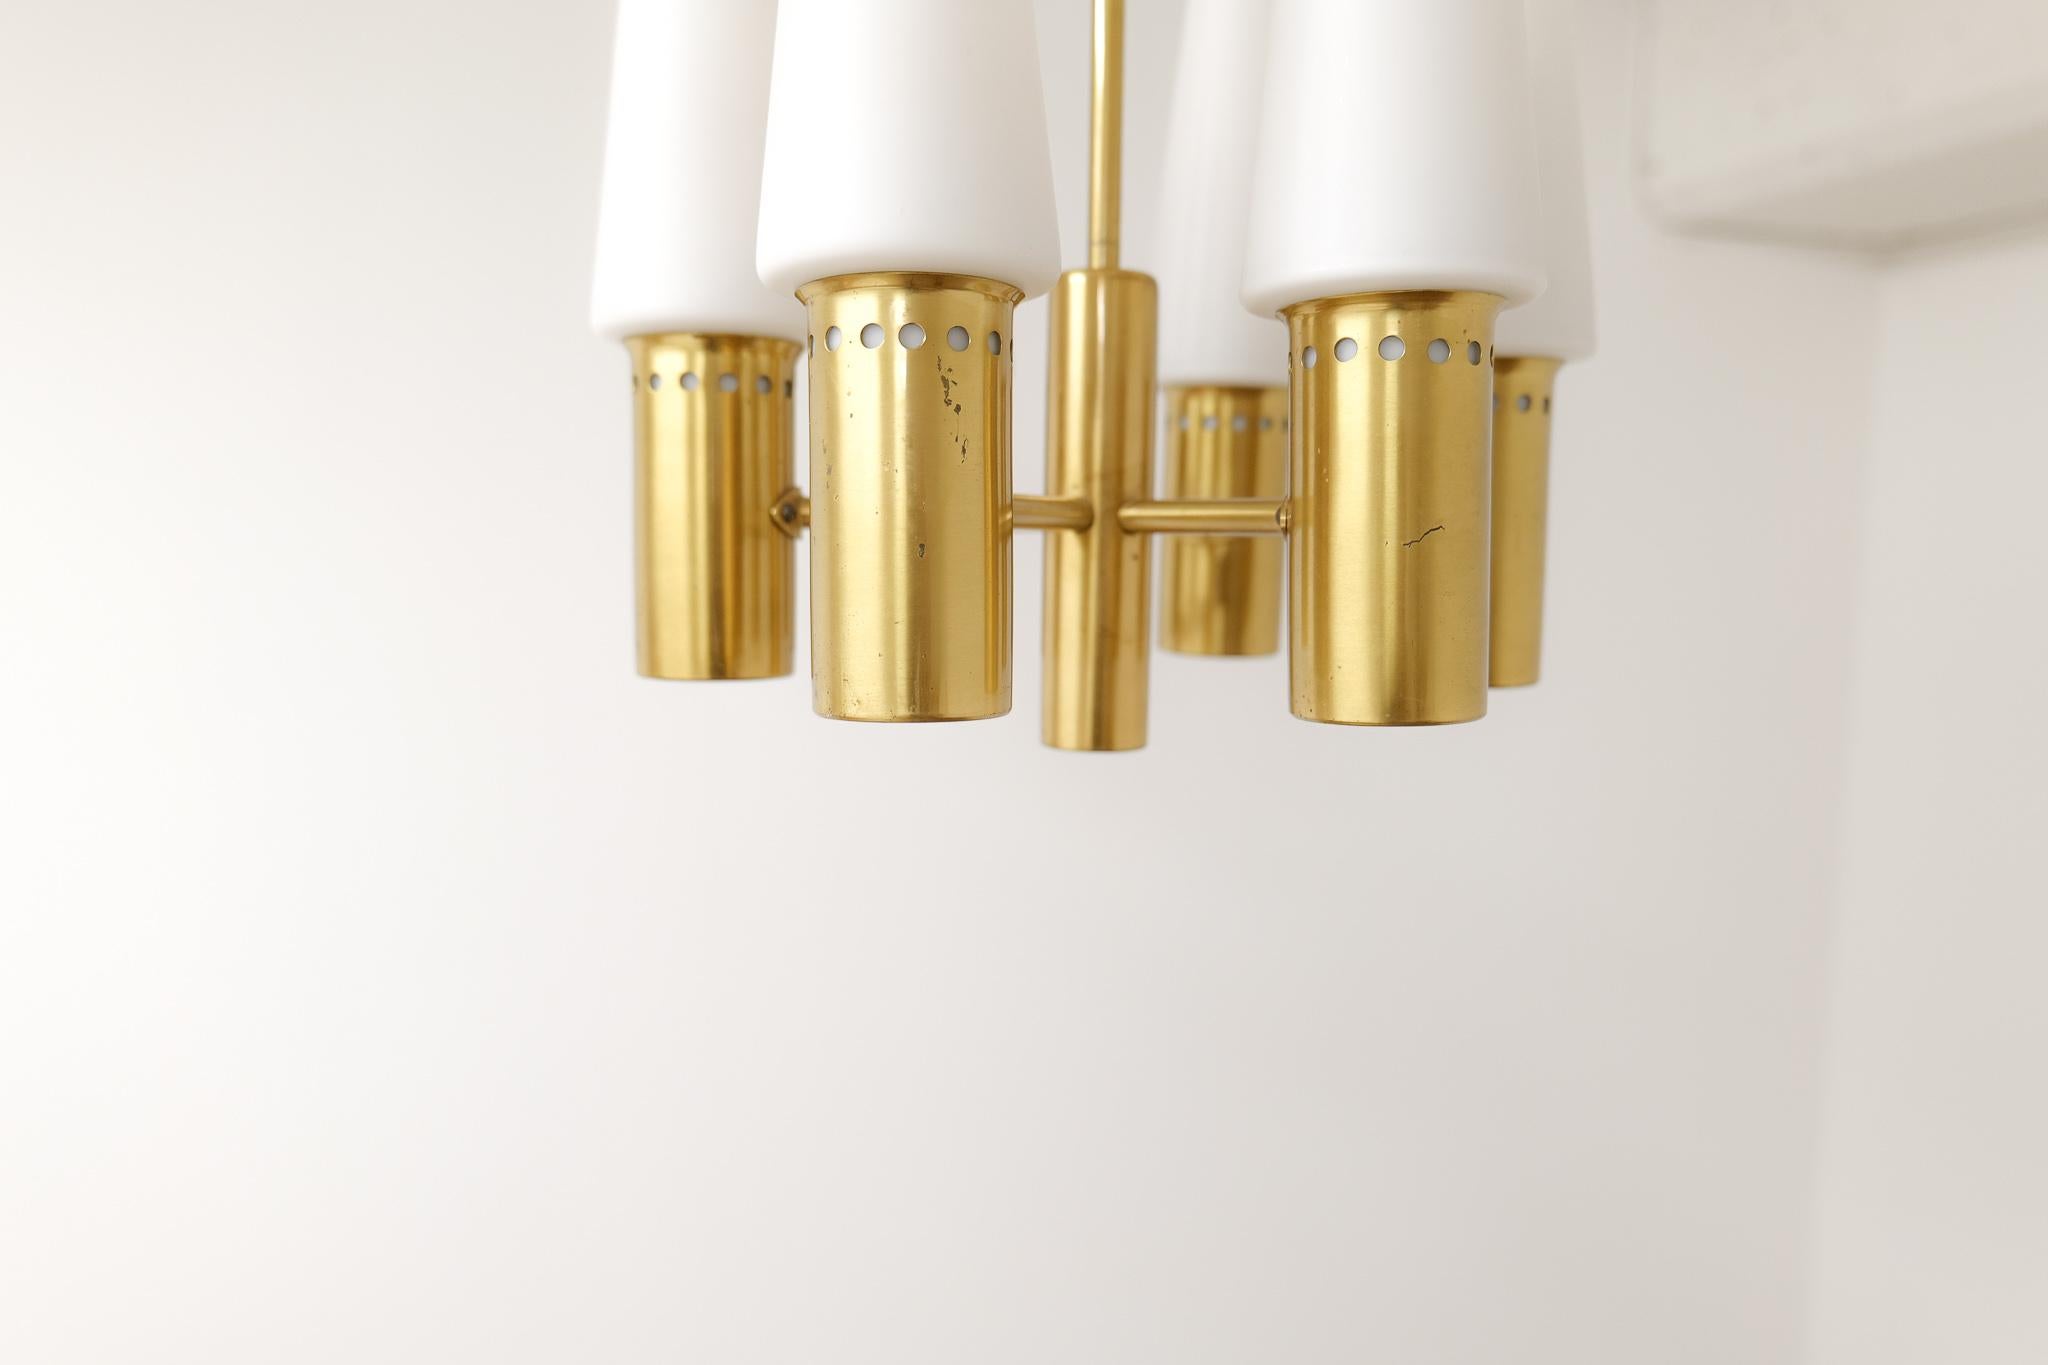 Midcentury Hans-Agne Jakobsson Brass and Opaline Ceiling Lamp, Sweden, 1950s For Sale 2